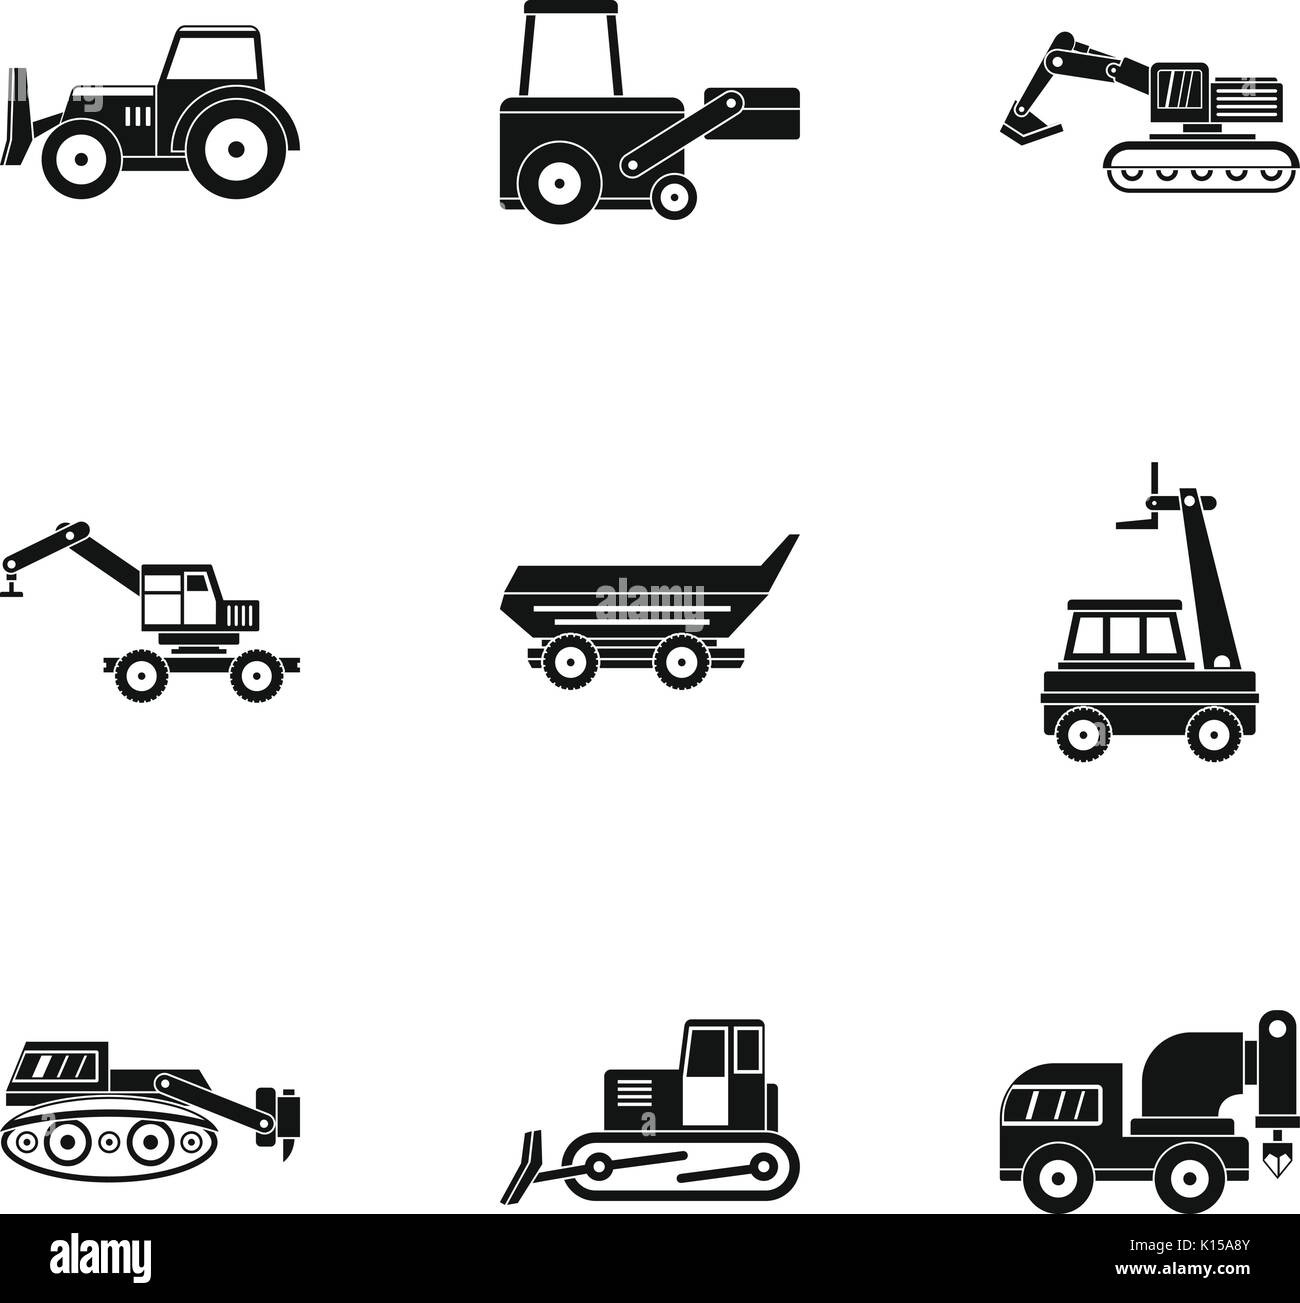 Construction vehicle icon set, simple style Stock Vector